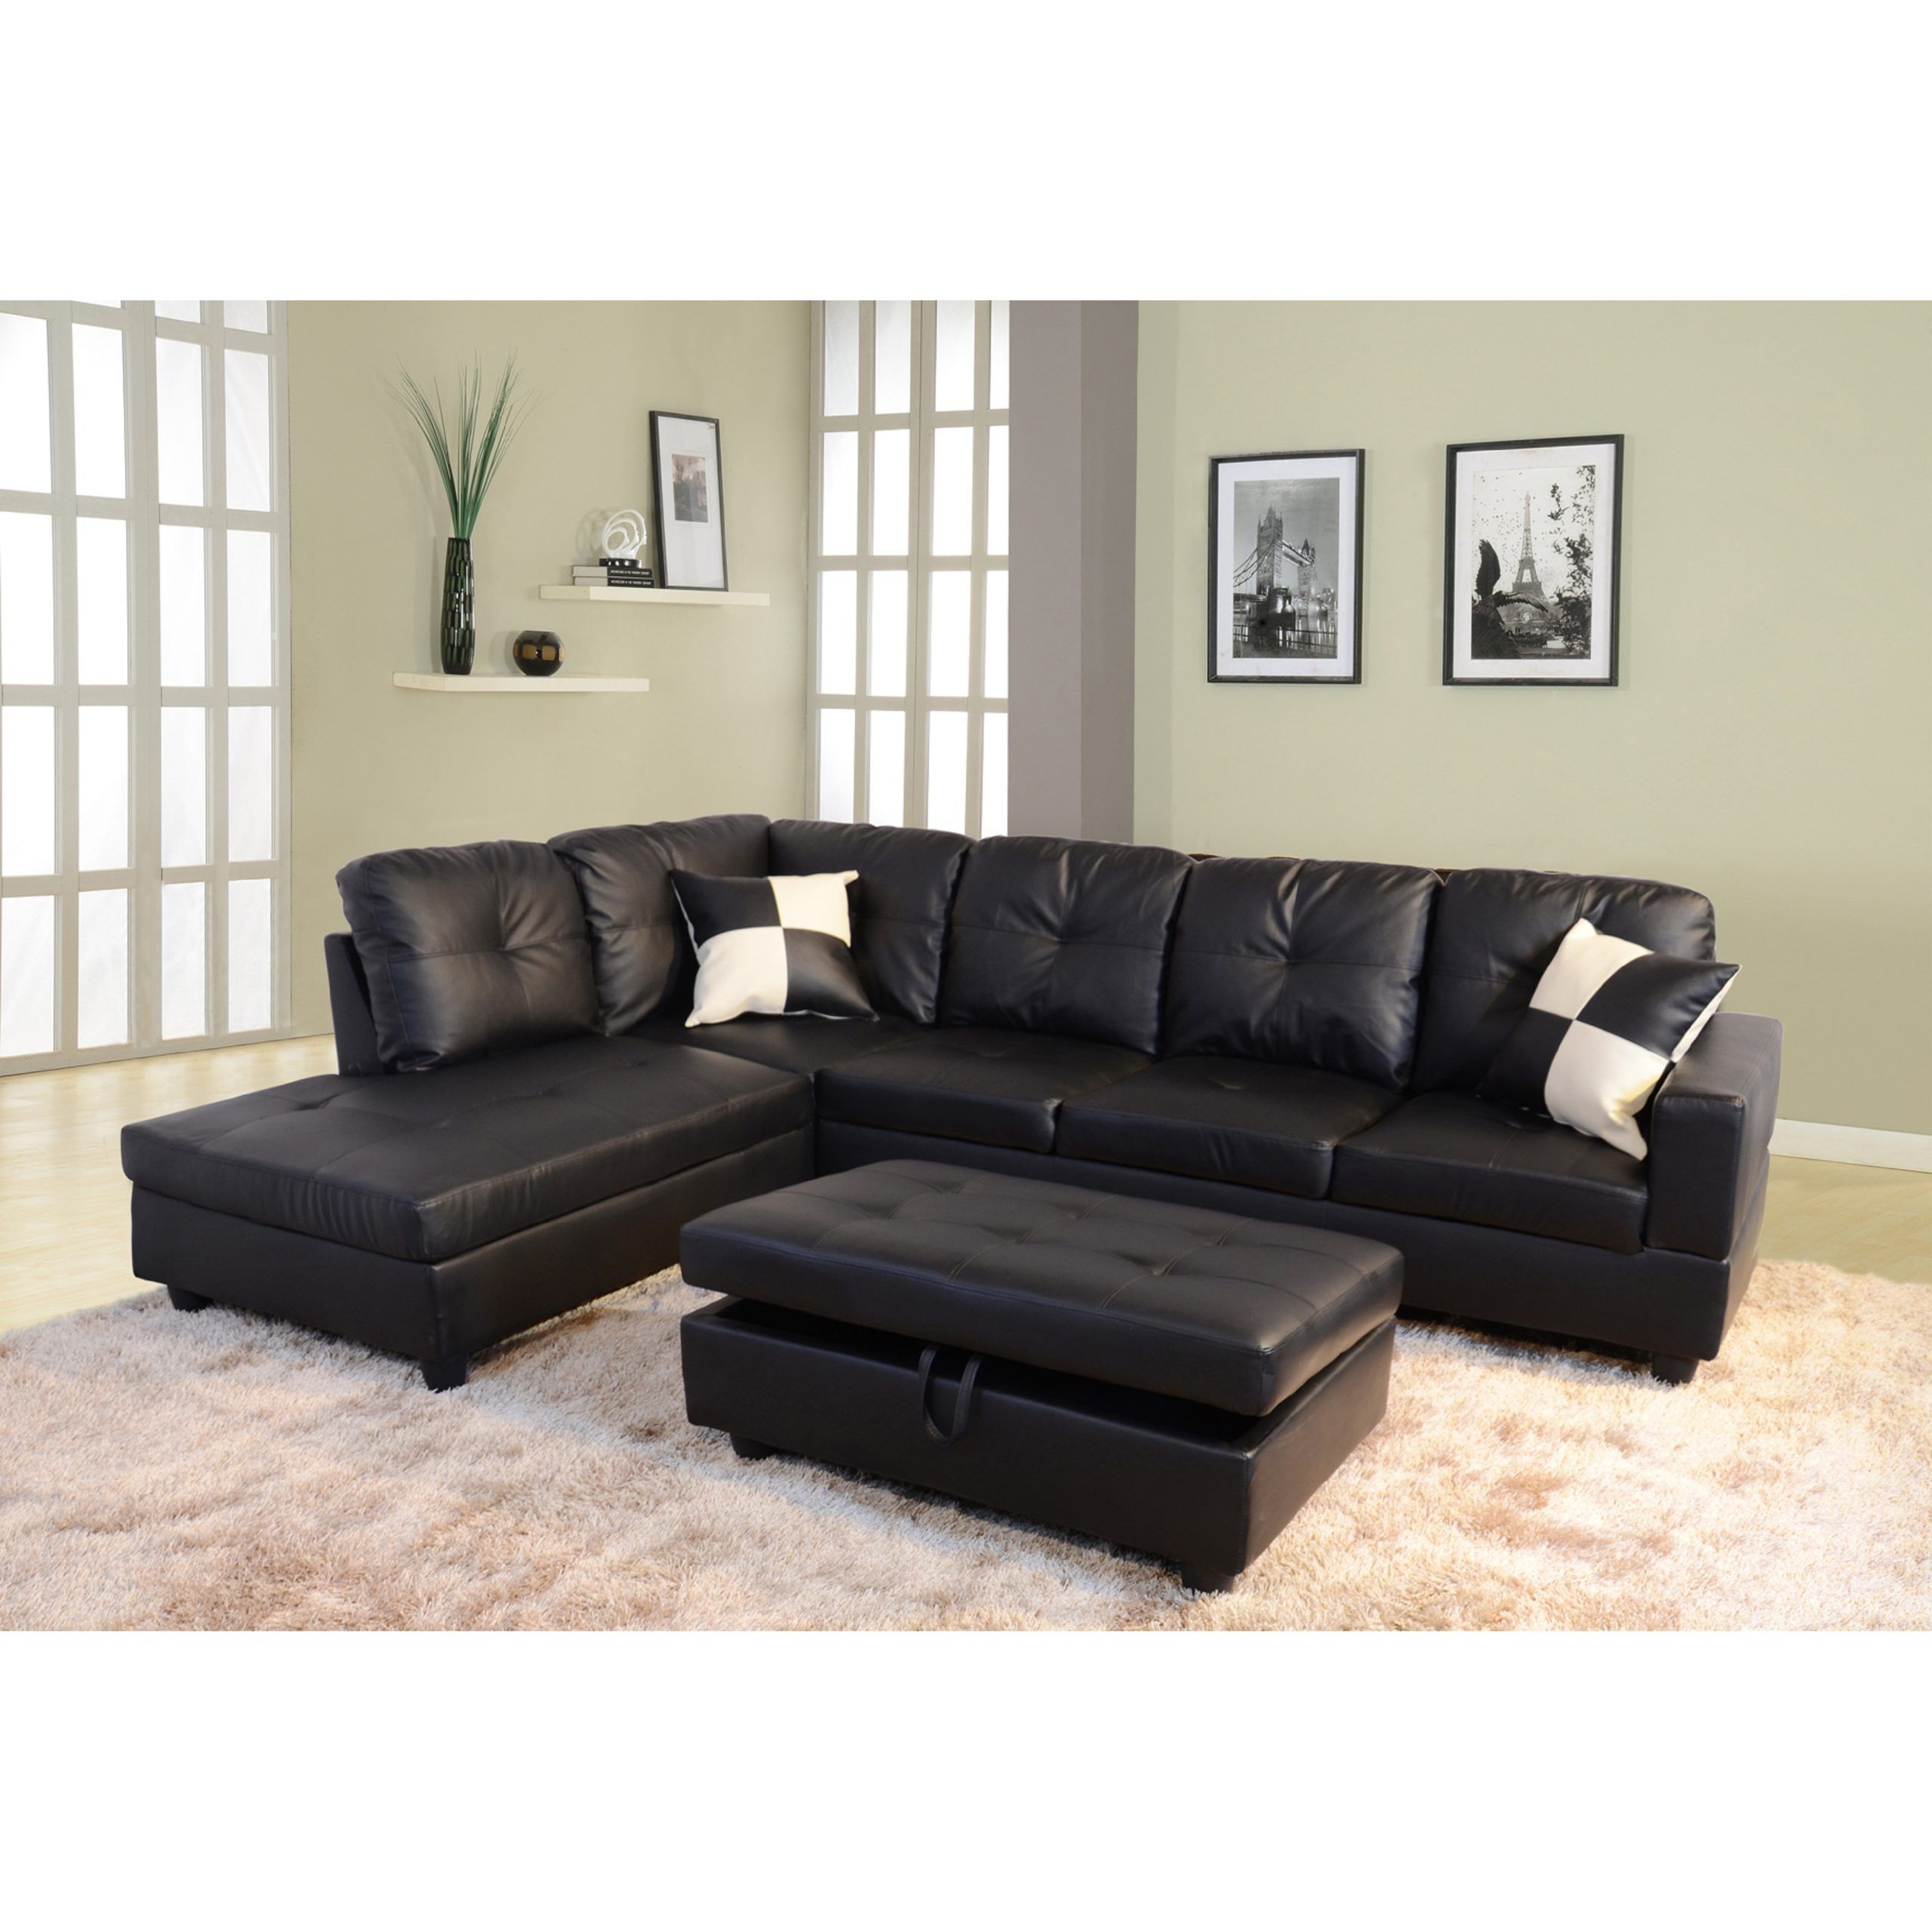 3 Pieces Sectional Sofa Set,Left Facing Black(091A) – On Sale – Bed Bath &  Beyond – 33560697 Inside 3 Piece Leather Sectional Sofa Sets (Photo 7 of 15)